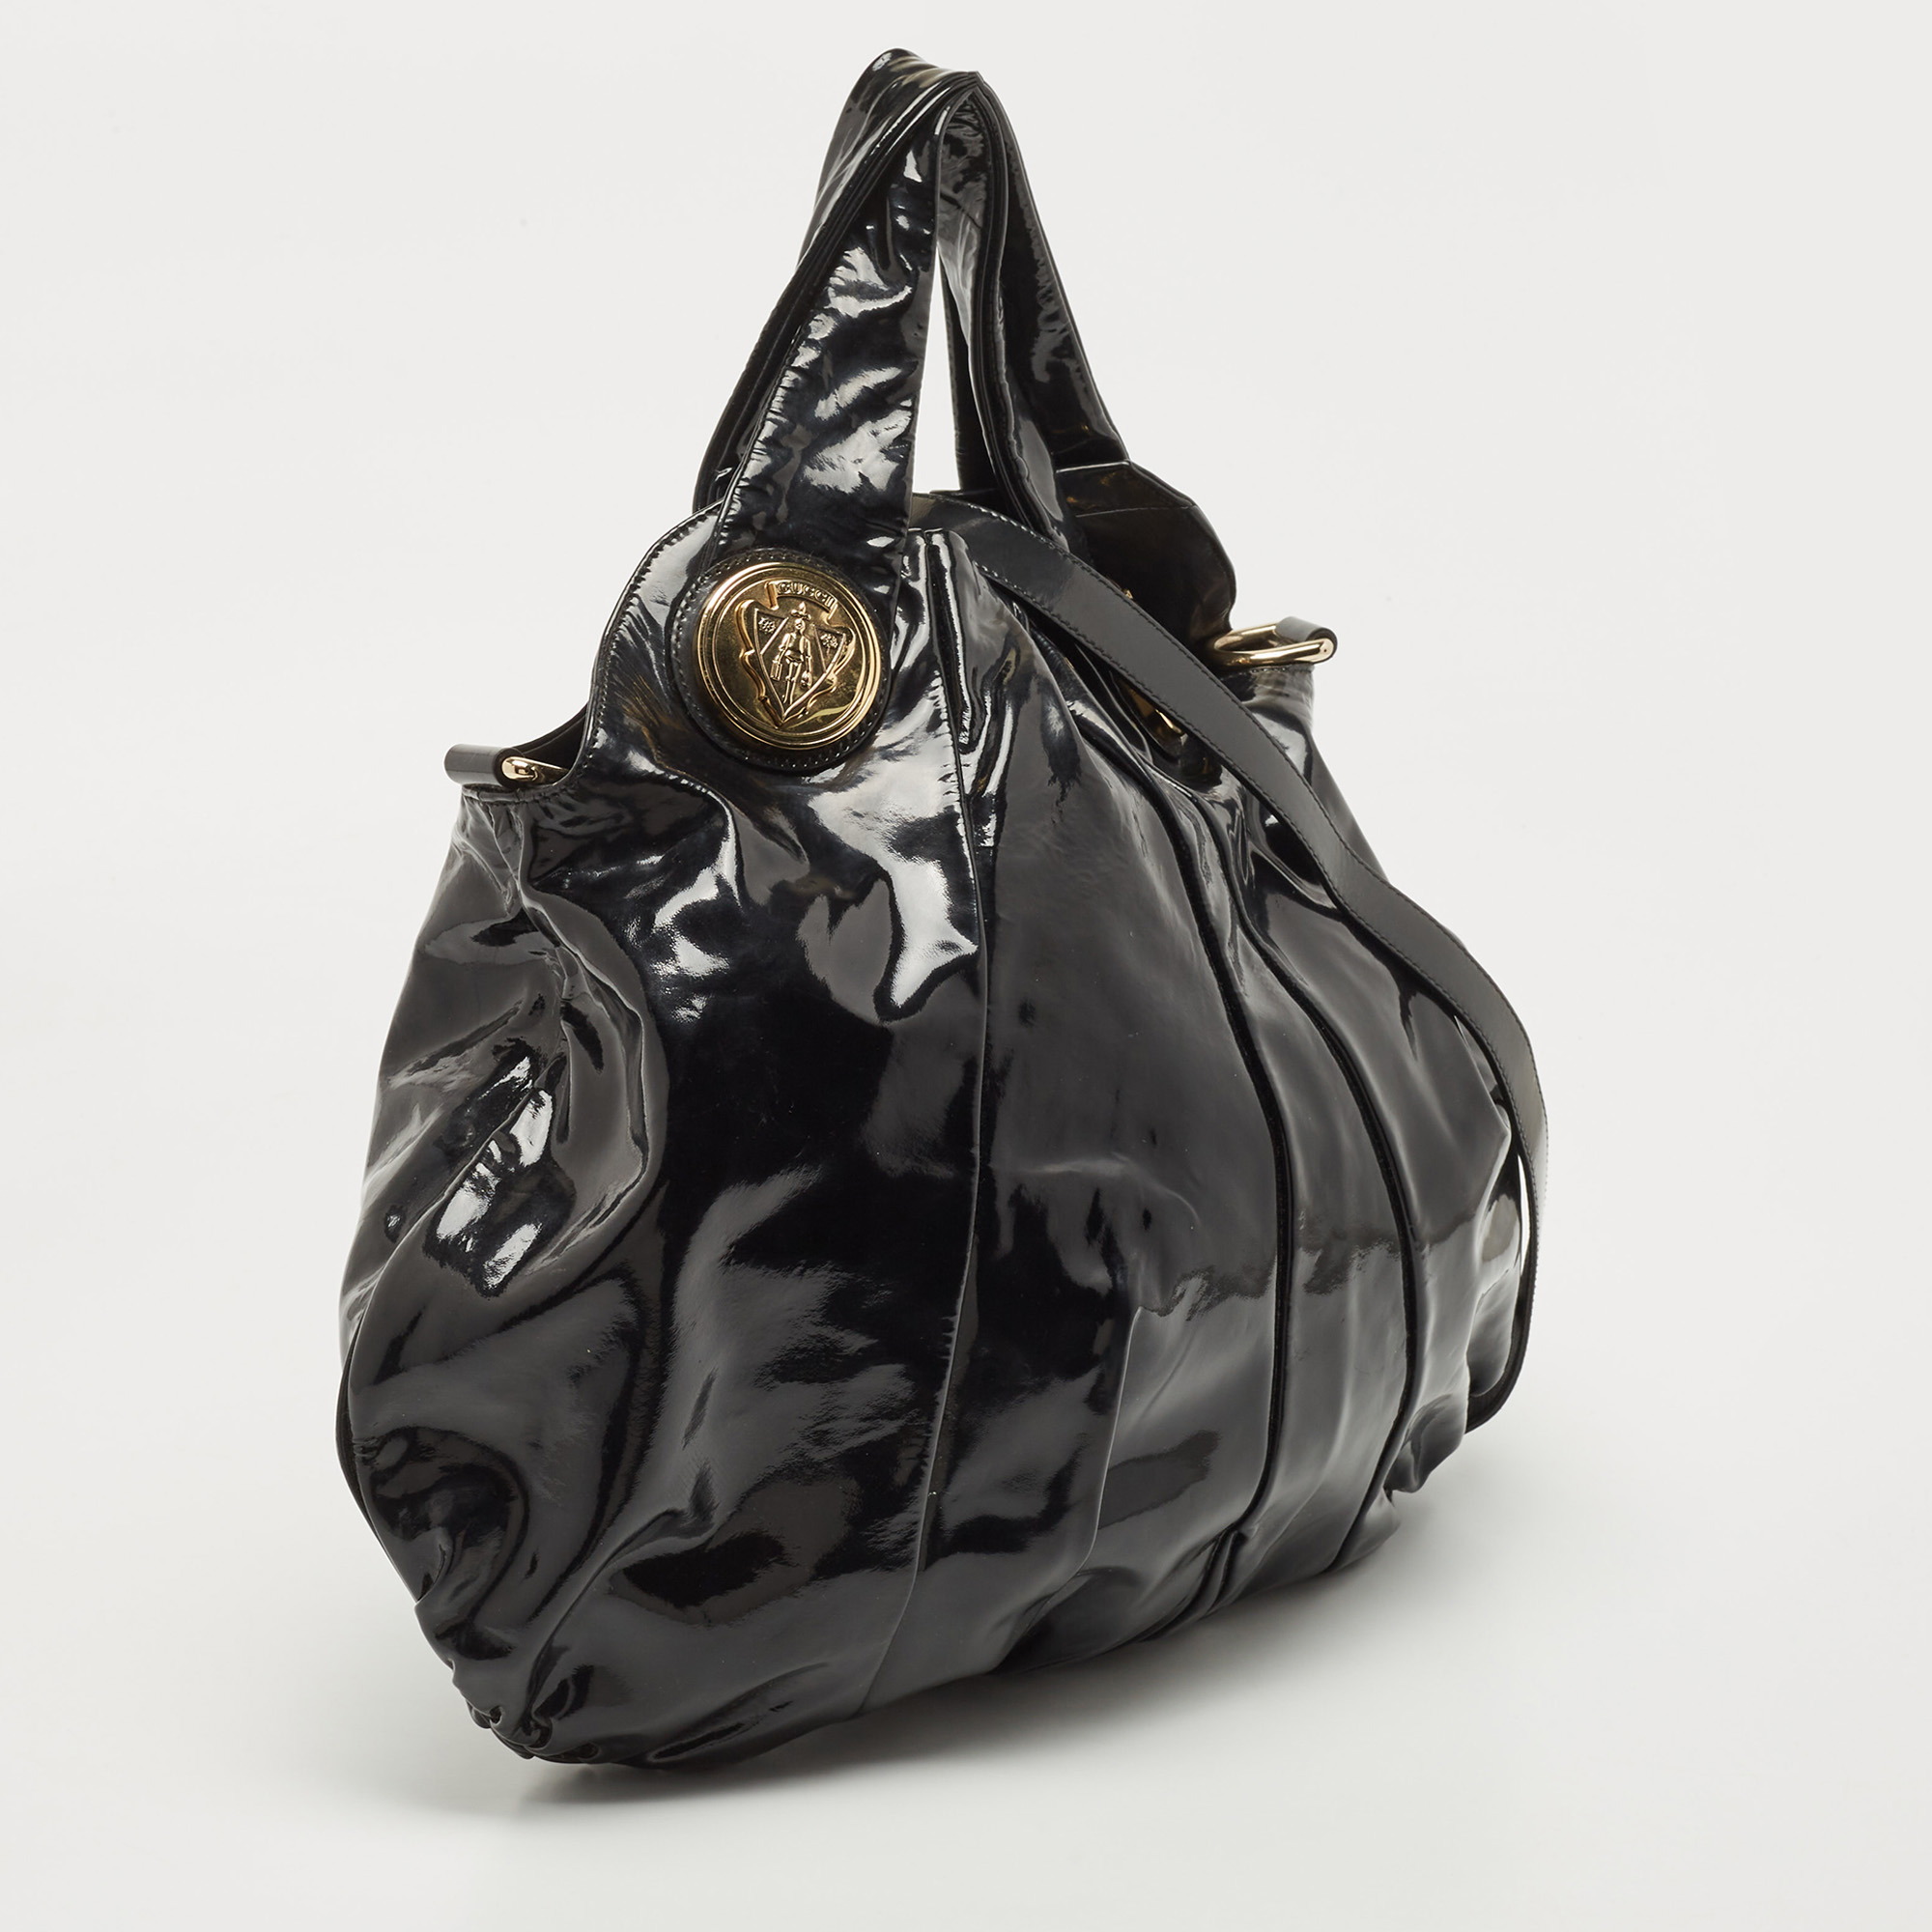 Gucci Black Patent Leather Large Hysteria Hobo